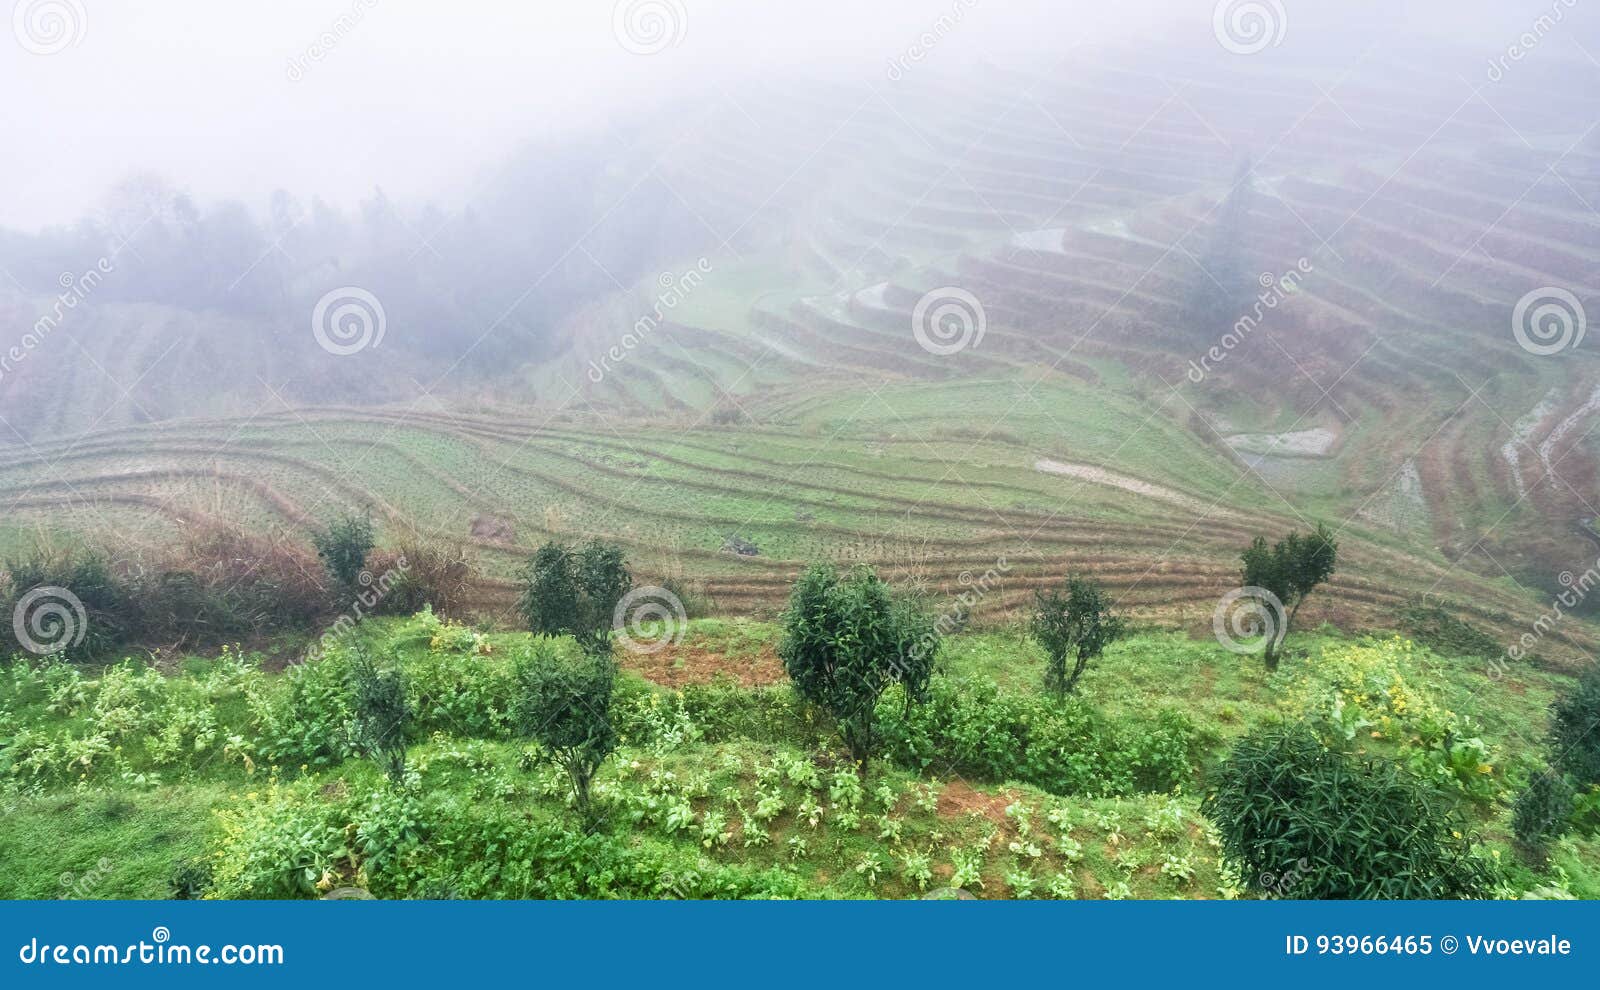 view of rice terraced hills in brume